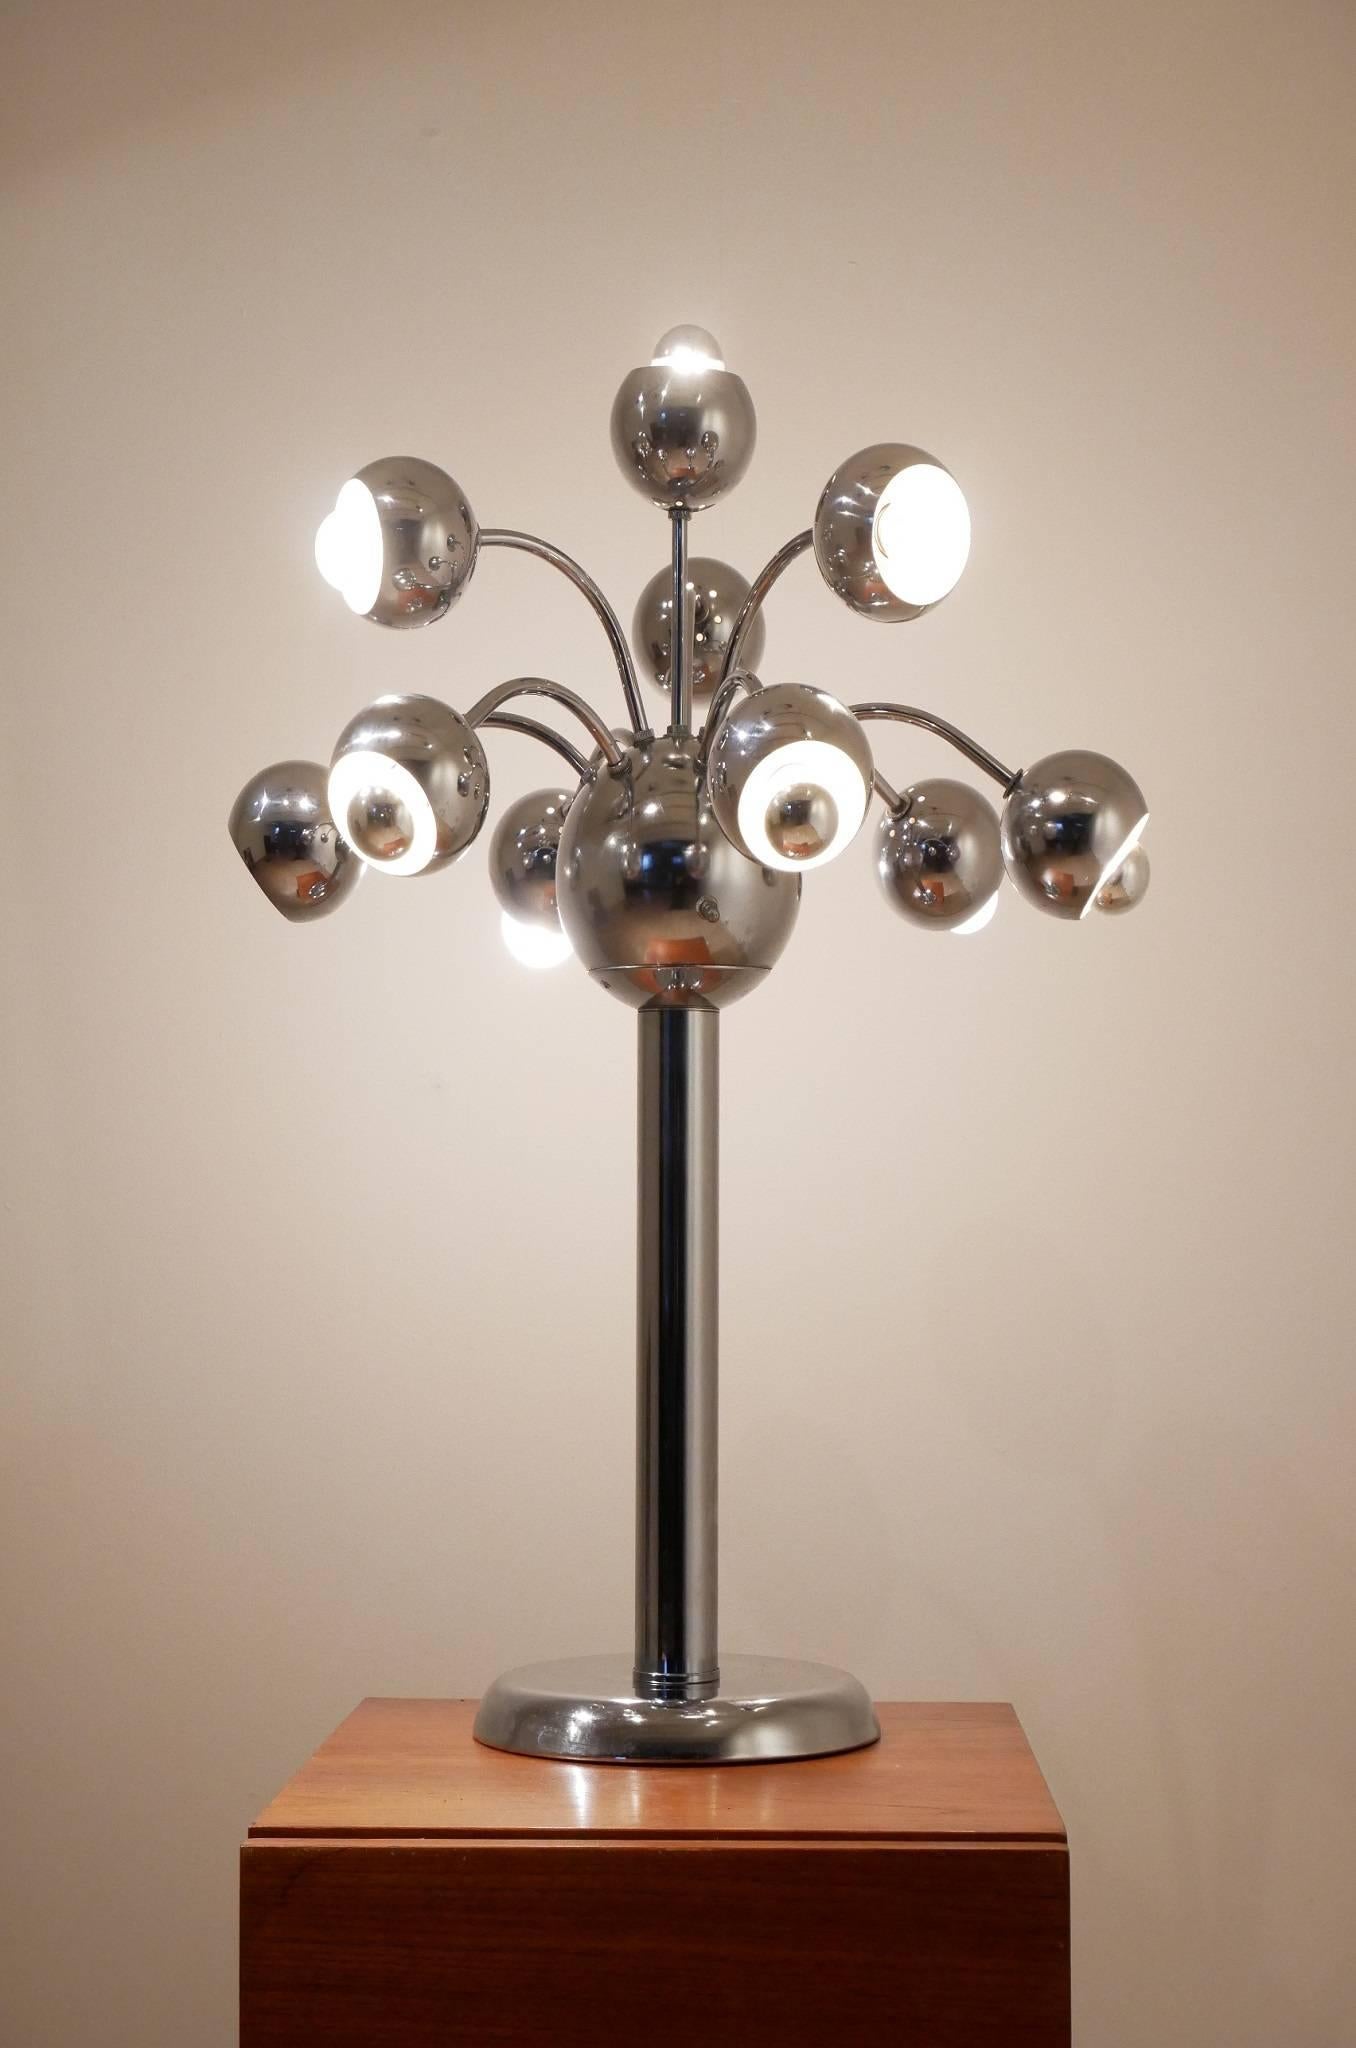 Extra-large sized, Italian table lamp most probably made by Reggiani. Tree shaped lamp with balls fully chromed. Original 3x way switch working plus extra dimmer.